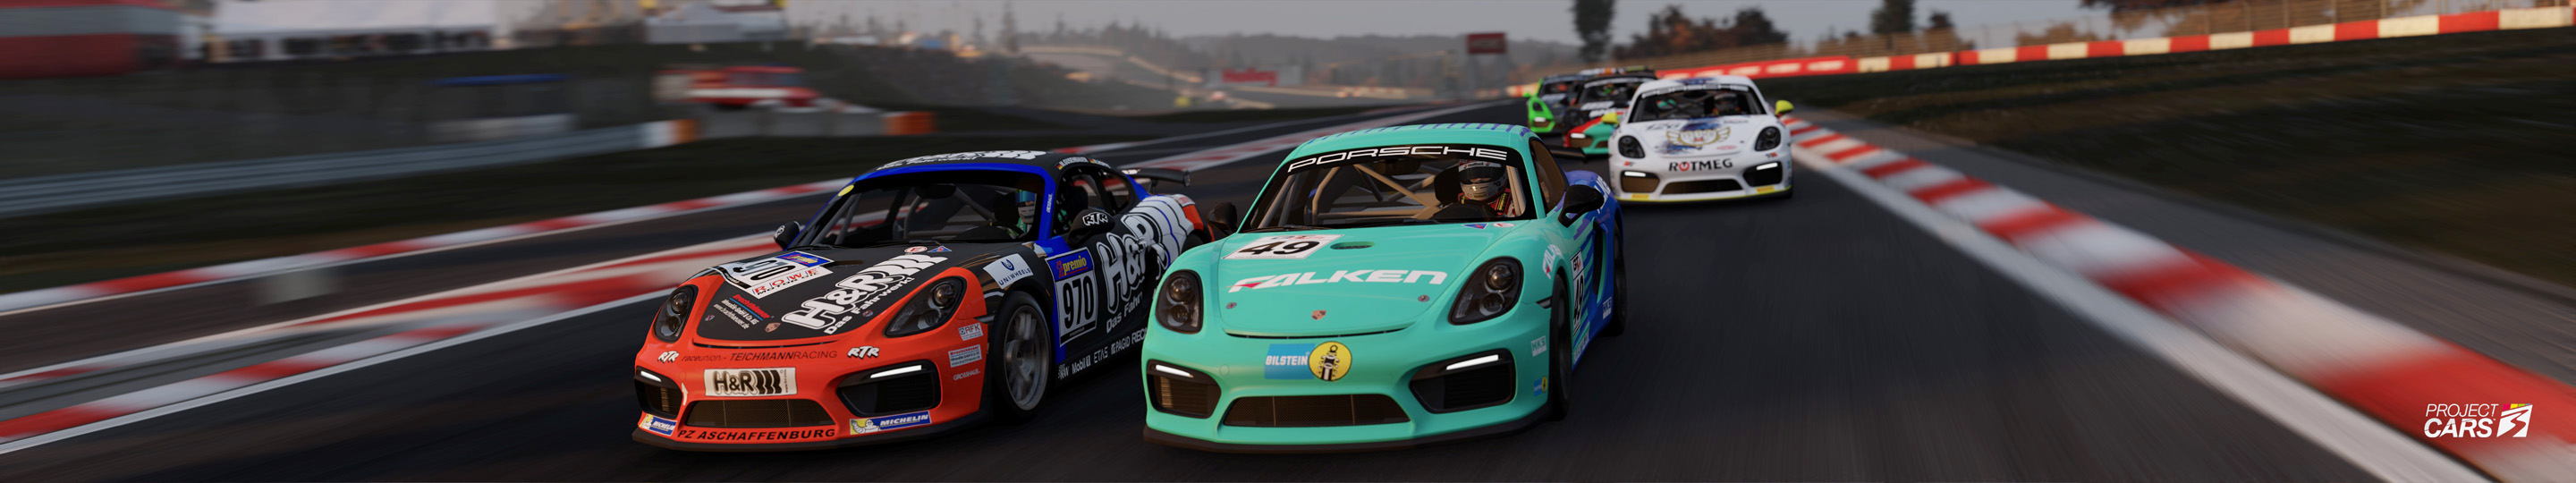 0 PROJECT CARS 3 PORSCHE Cayman GT4 at NURBURGRING copy.jpg